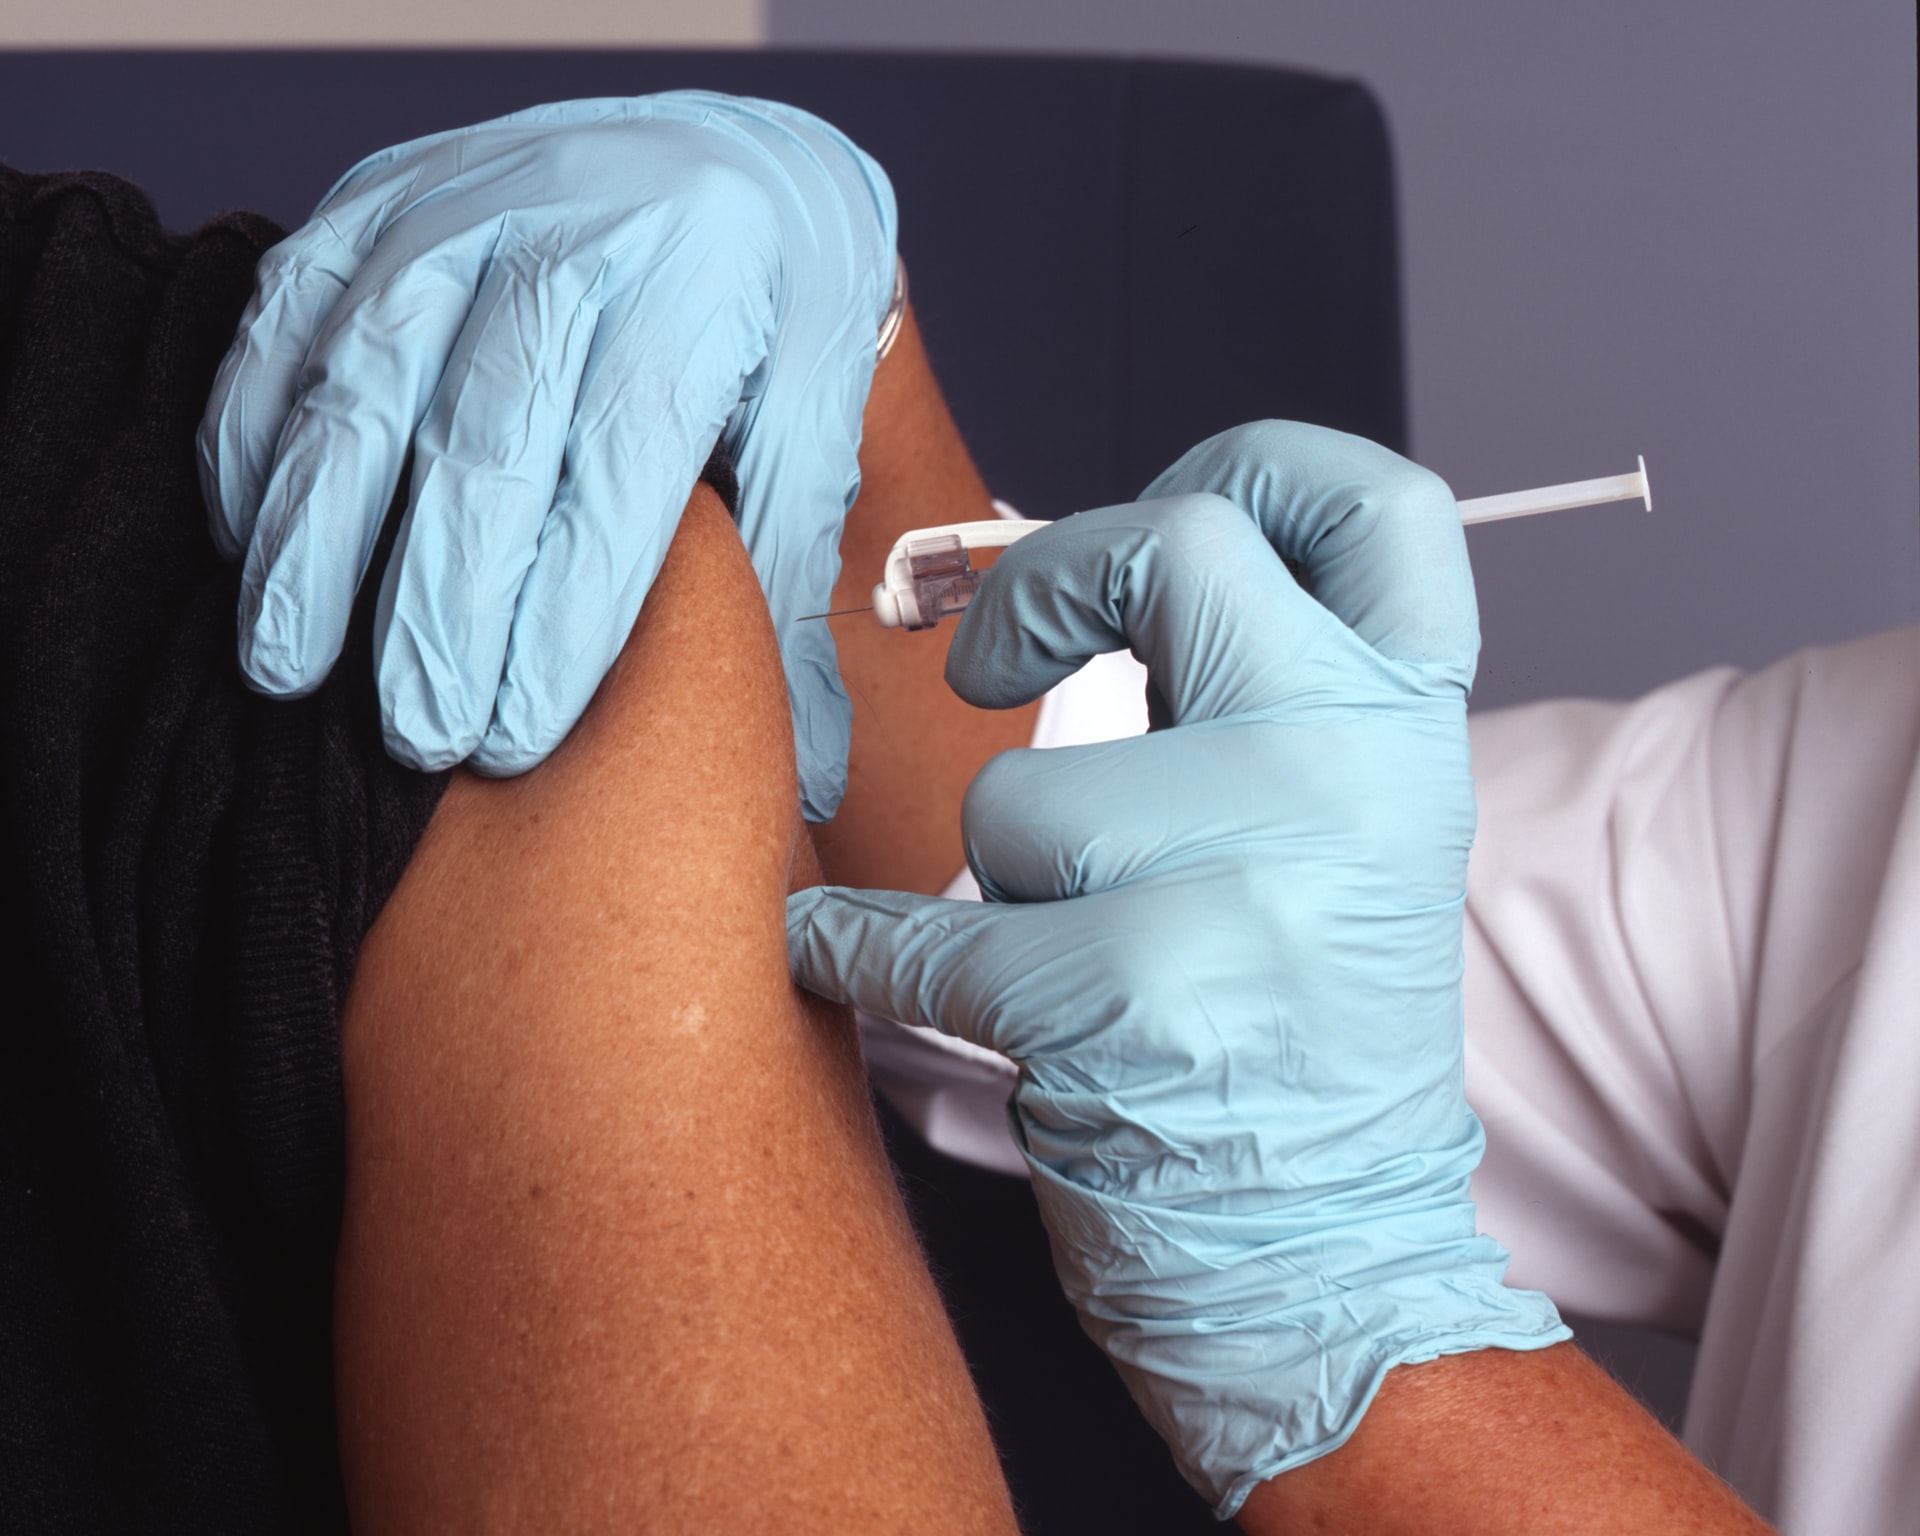 Government authorises commercial COVID vaccinations — but you can’t buy one yet